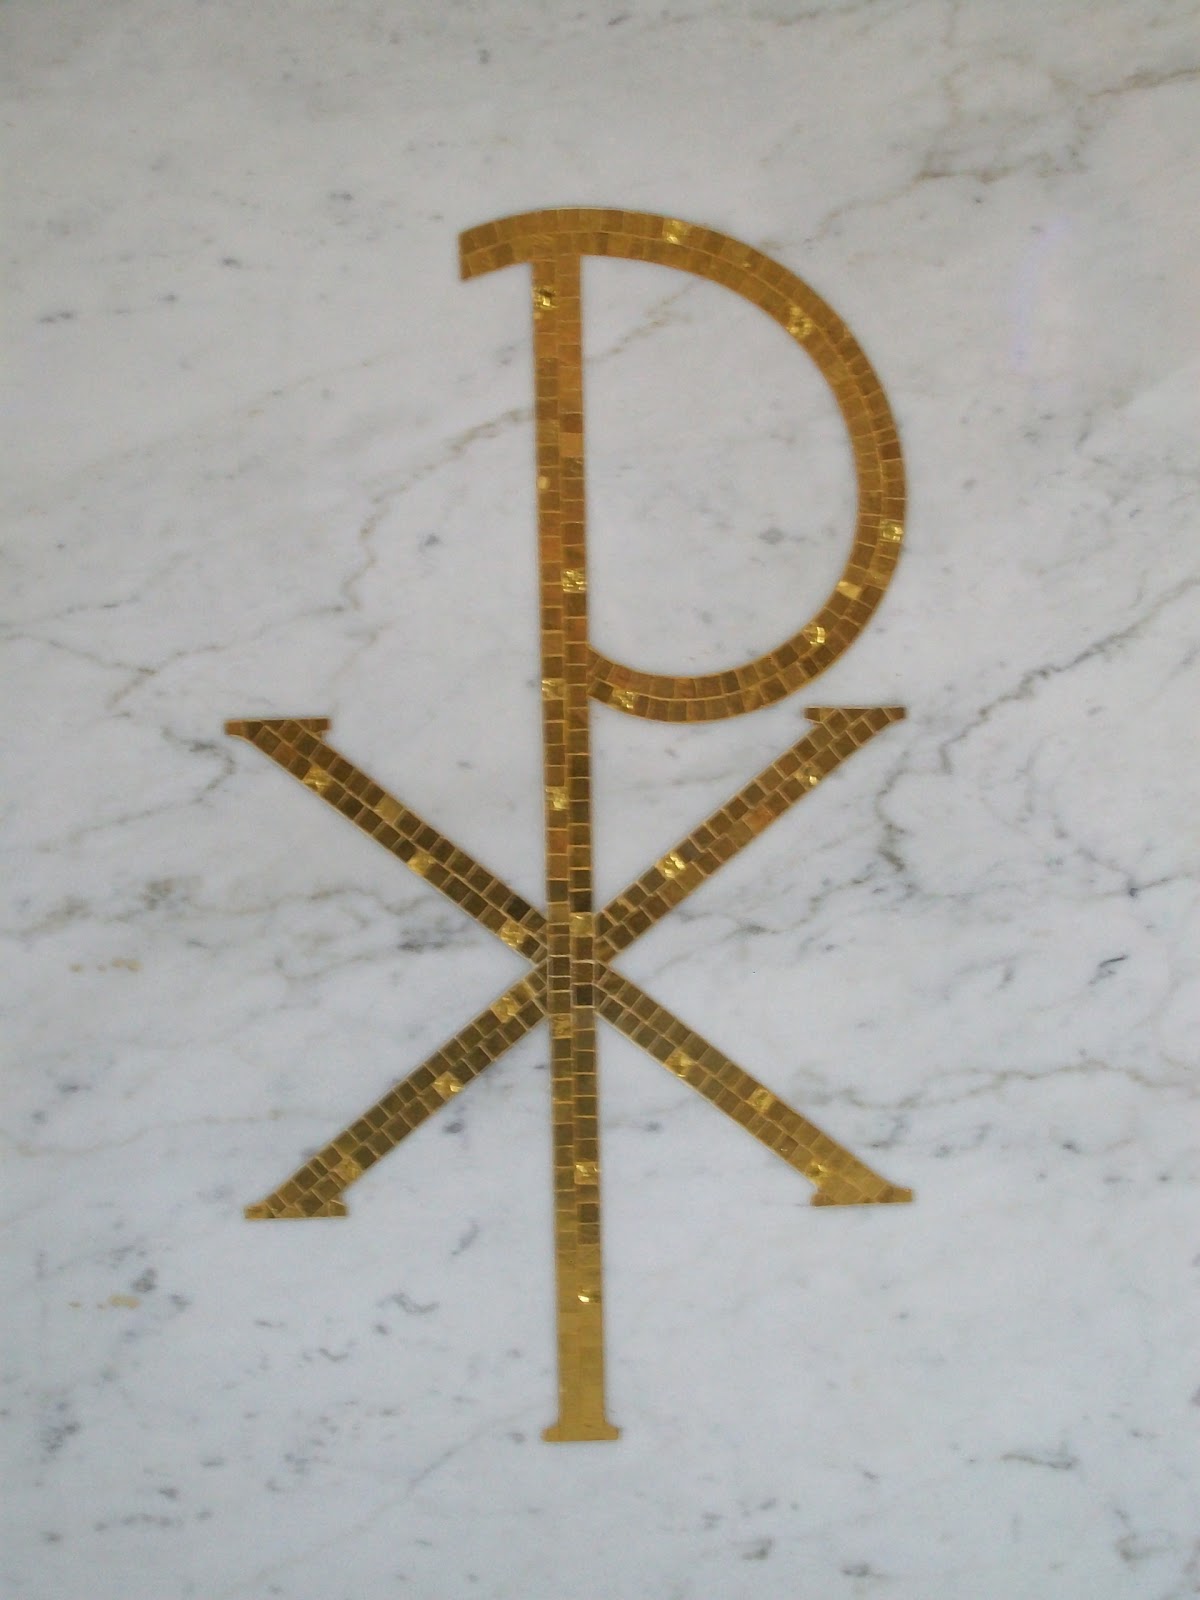 Bible Saints The Meaning Behind The Xp Chi Rho Symbol